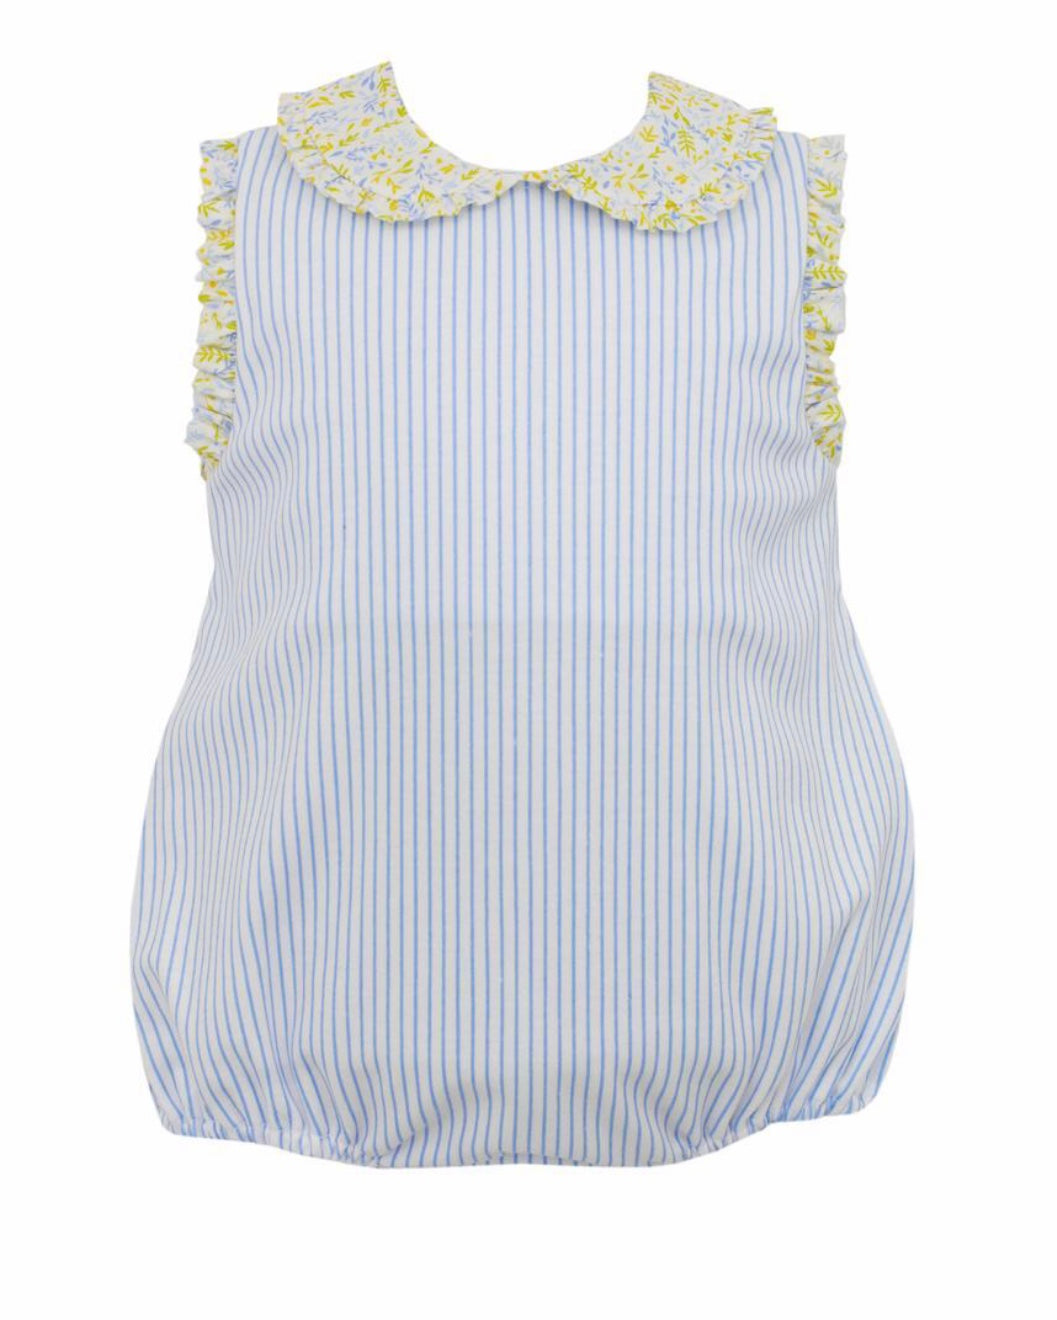 Blue and White Stripe Pima Cotten Bubble with Floral Peter Pan Collar